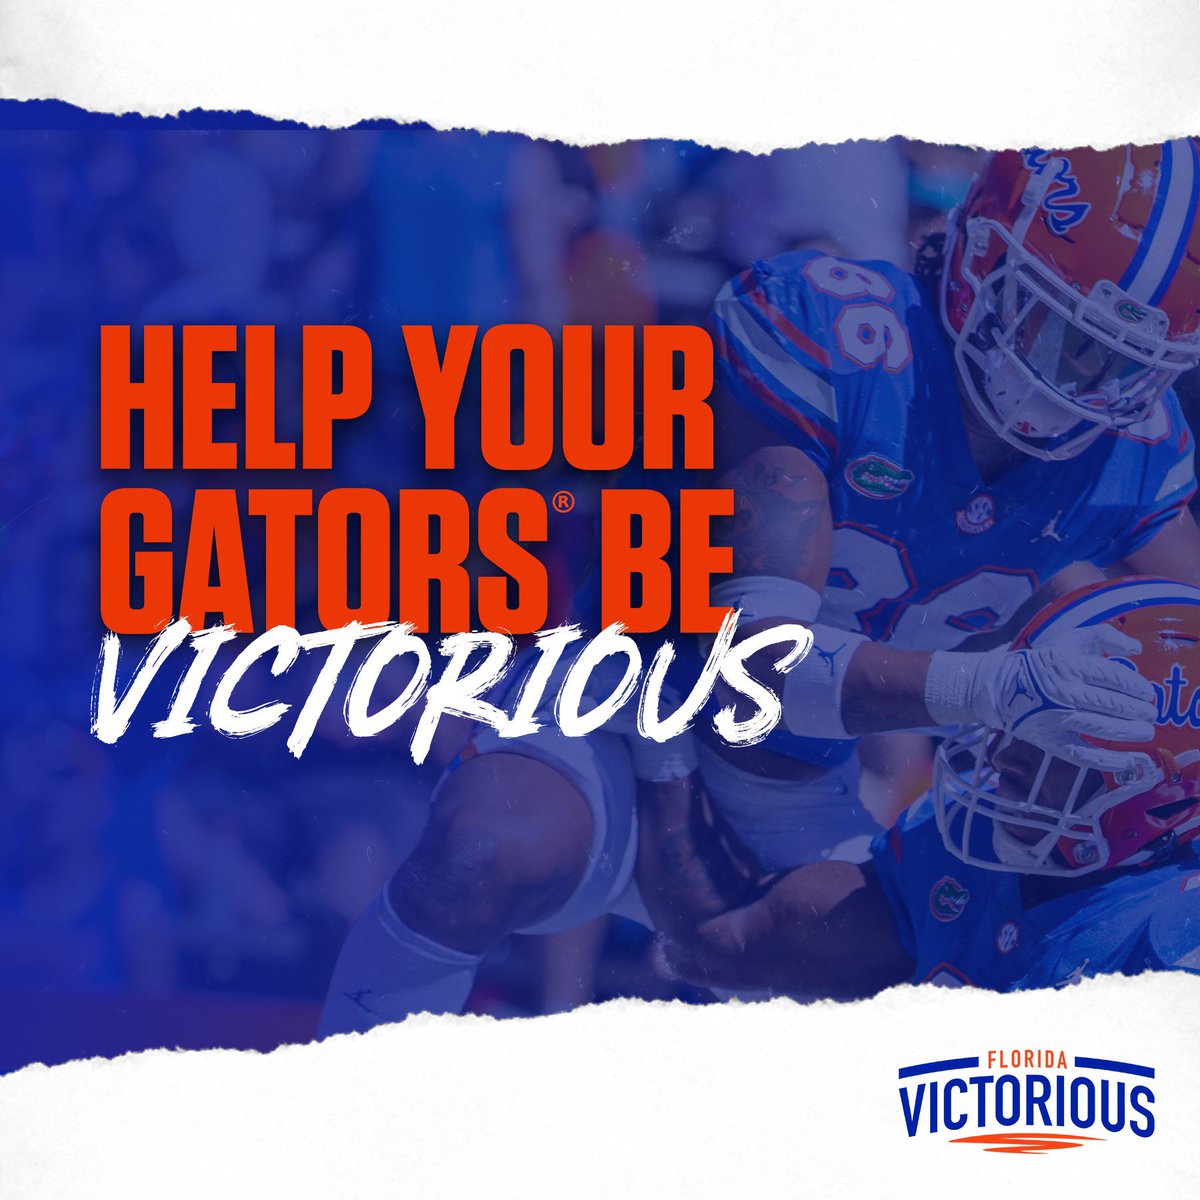 Ain’t nothing better than being a gator! This school holds a special place in my heart and I can’t to ball out in front of thousands of gator fans. We need y’all support gator nation we’re building something special here! floridavictorious.com/join-now/ #FloridaVictorious #GoGators🐊